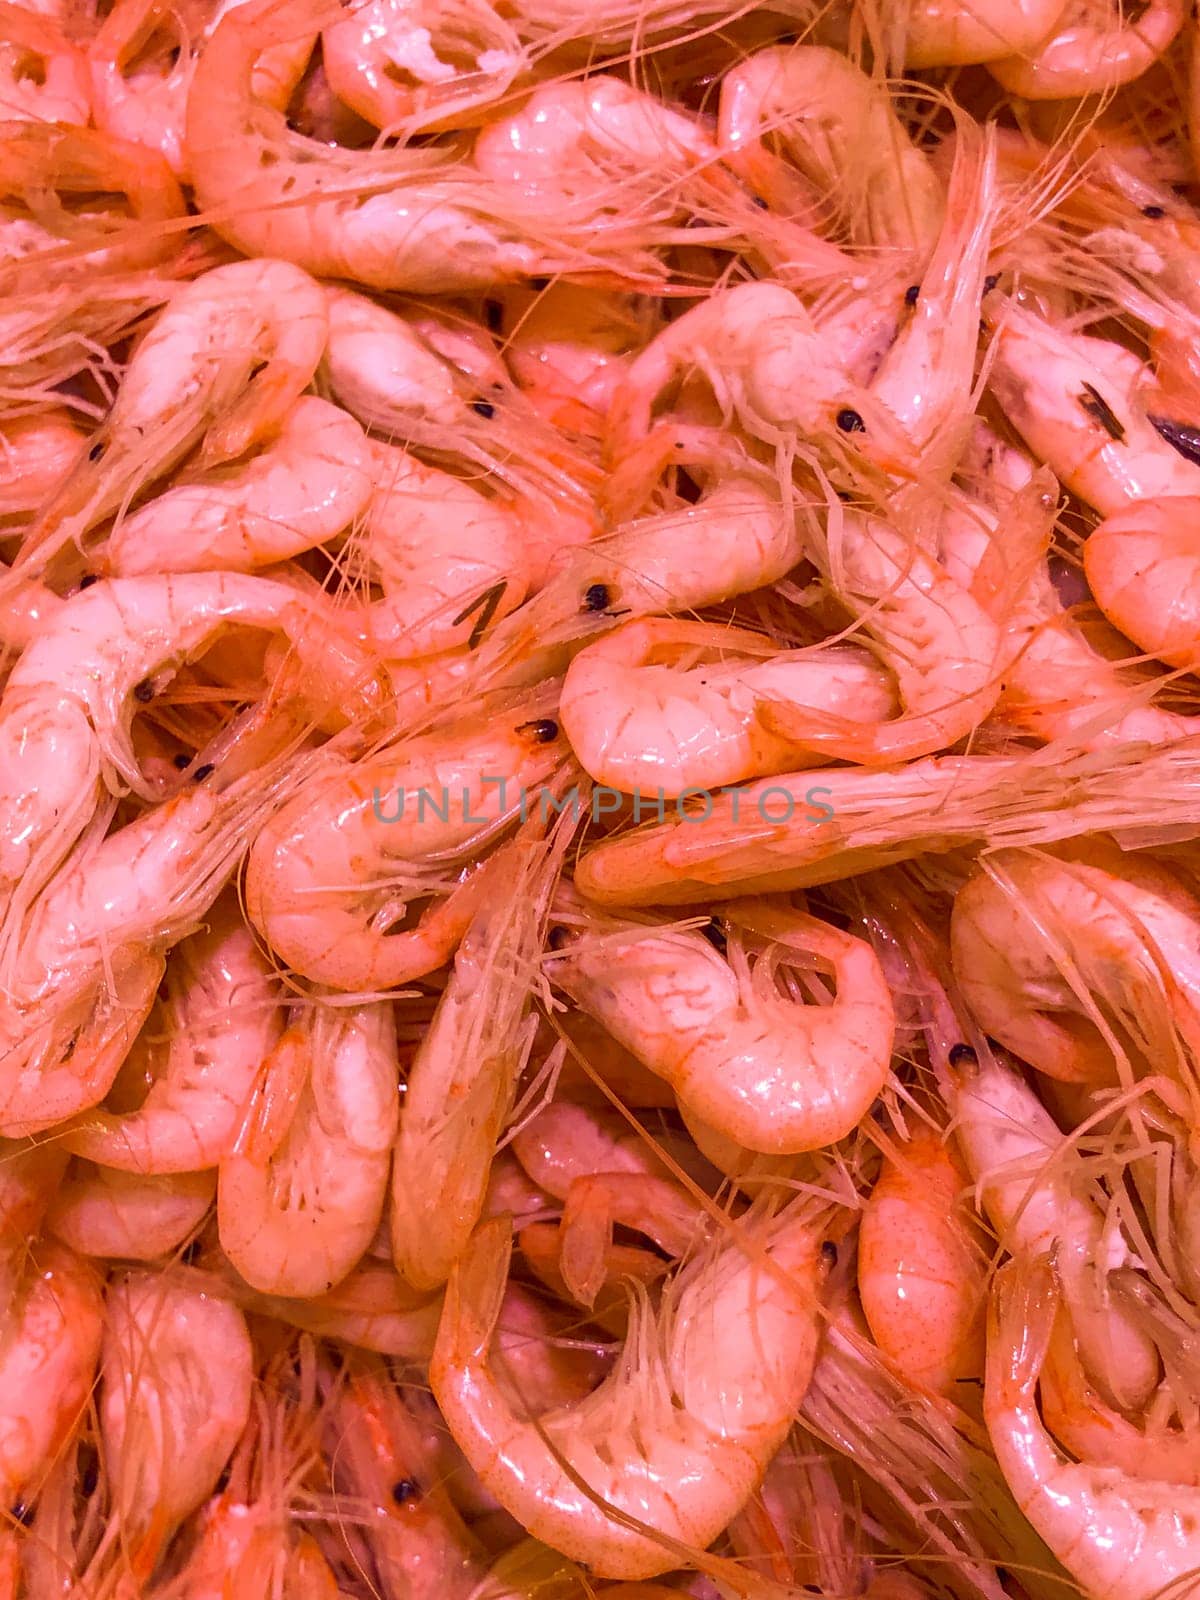 Fresh prawn shrimps on ice for sale at fish market, High quality photo